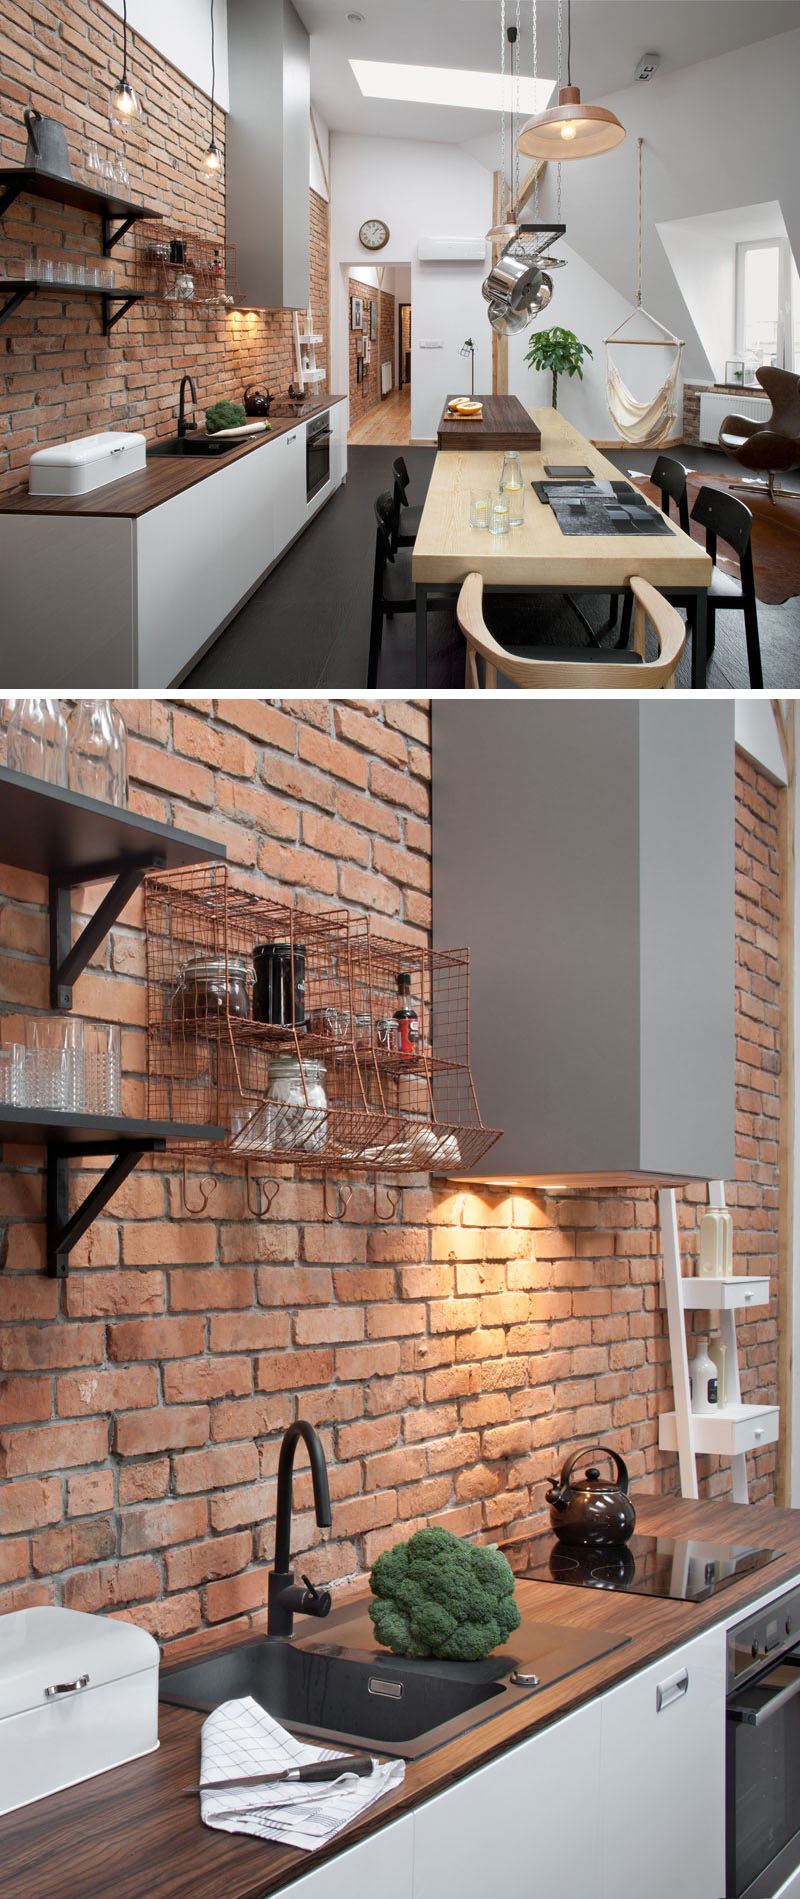 Throughout the apartment there are bright white walls, touches of brick and wood, which all pair nicely with the wood and dark charcoal gray tiled flooring.